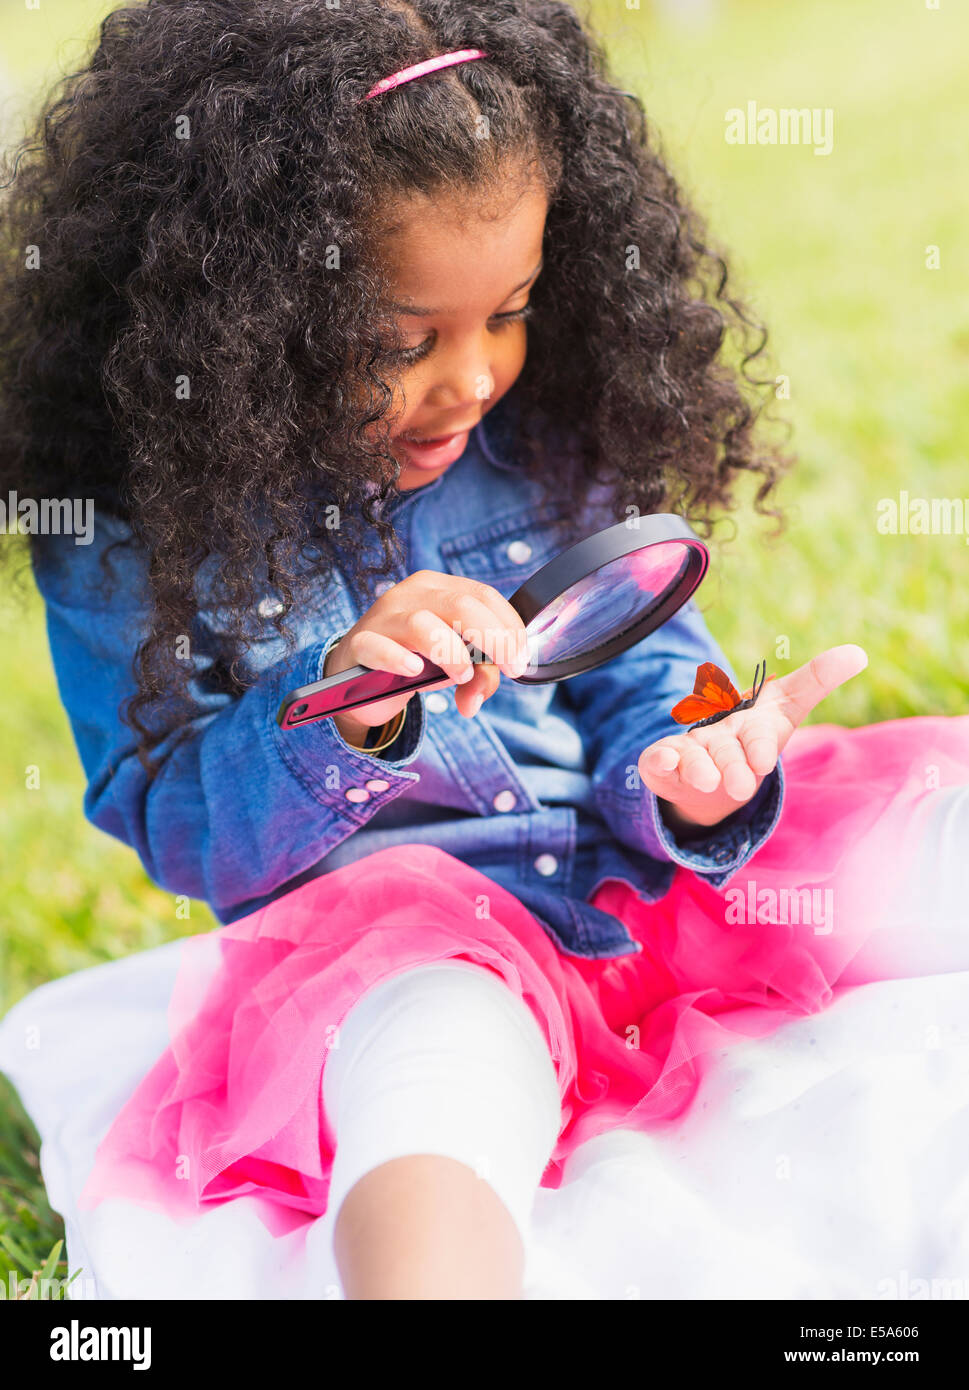 Mixed race girl examining butterfly with magnifying glass Stock Photo